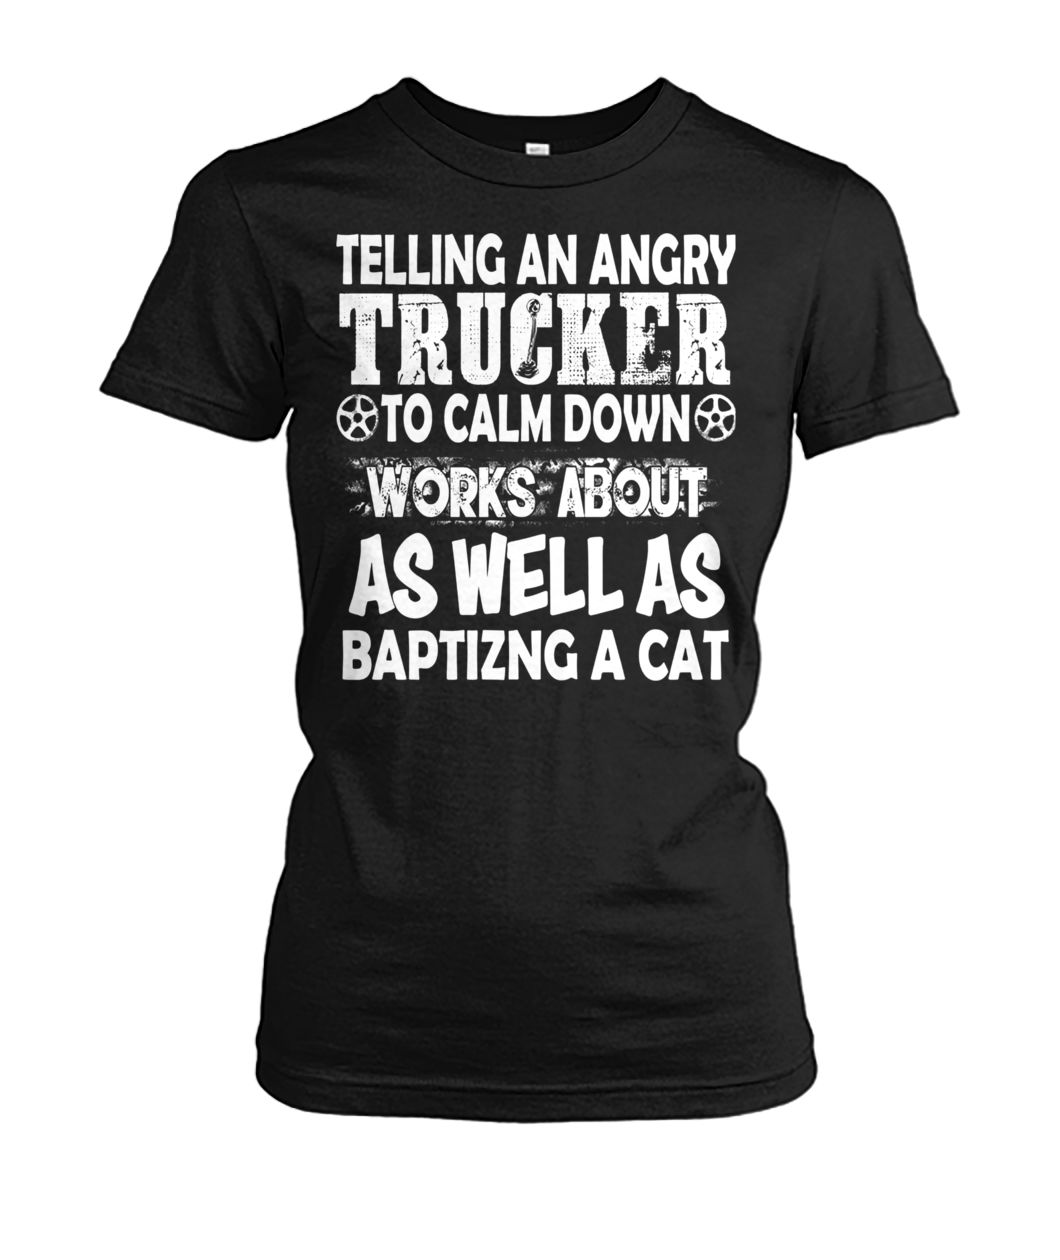 Telling an angry trucker to calm down works about as well as baptizng a cat women's crew tee